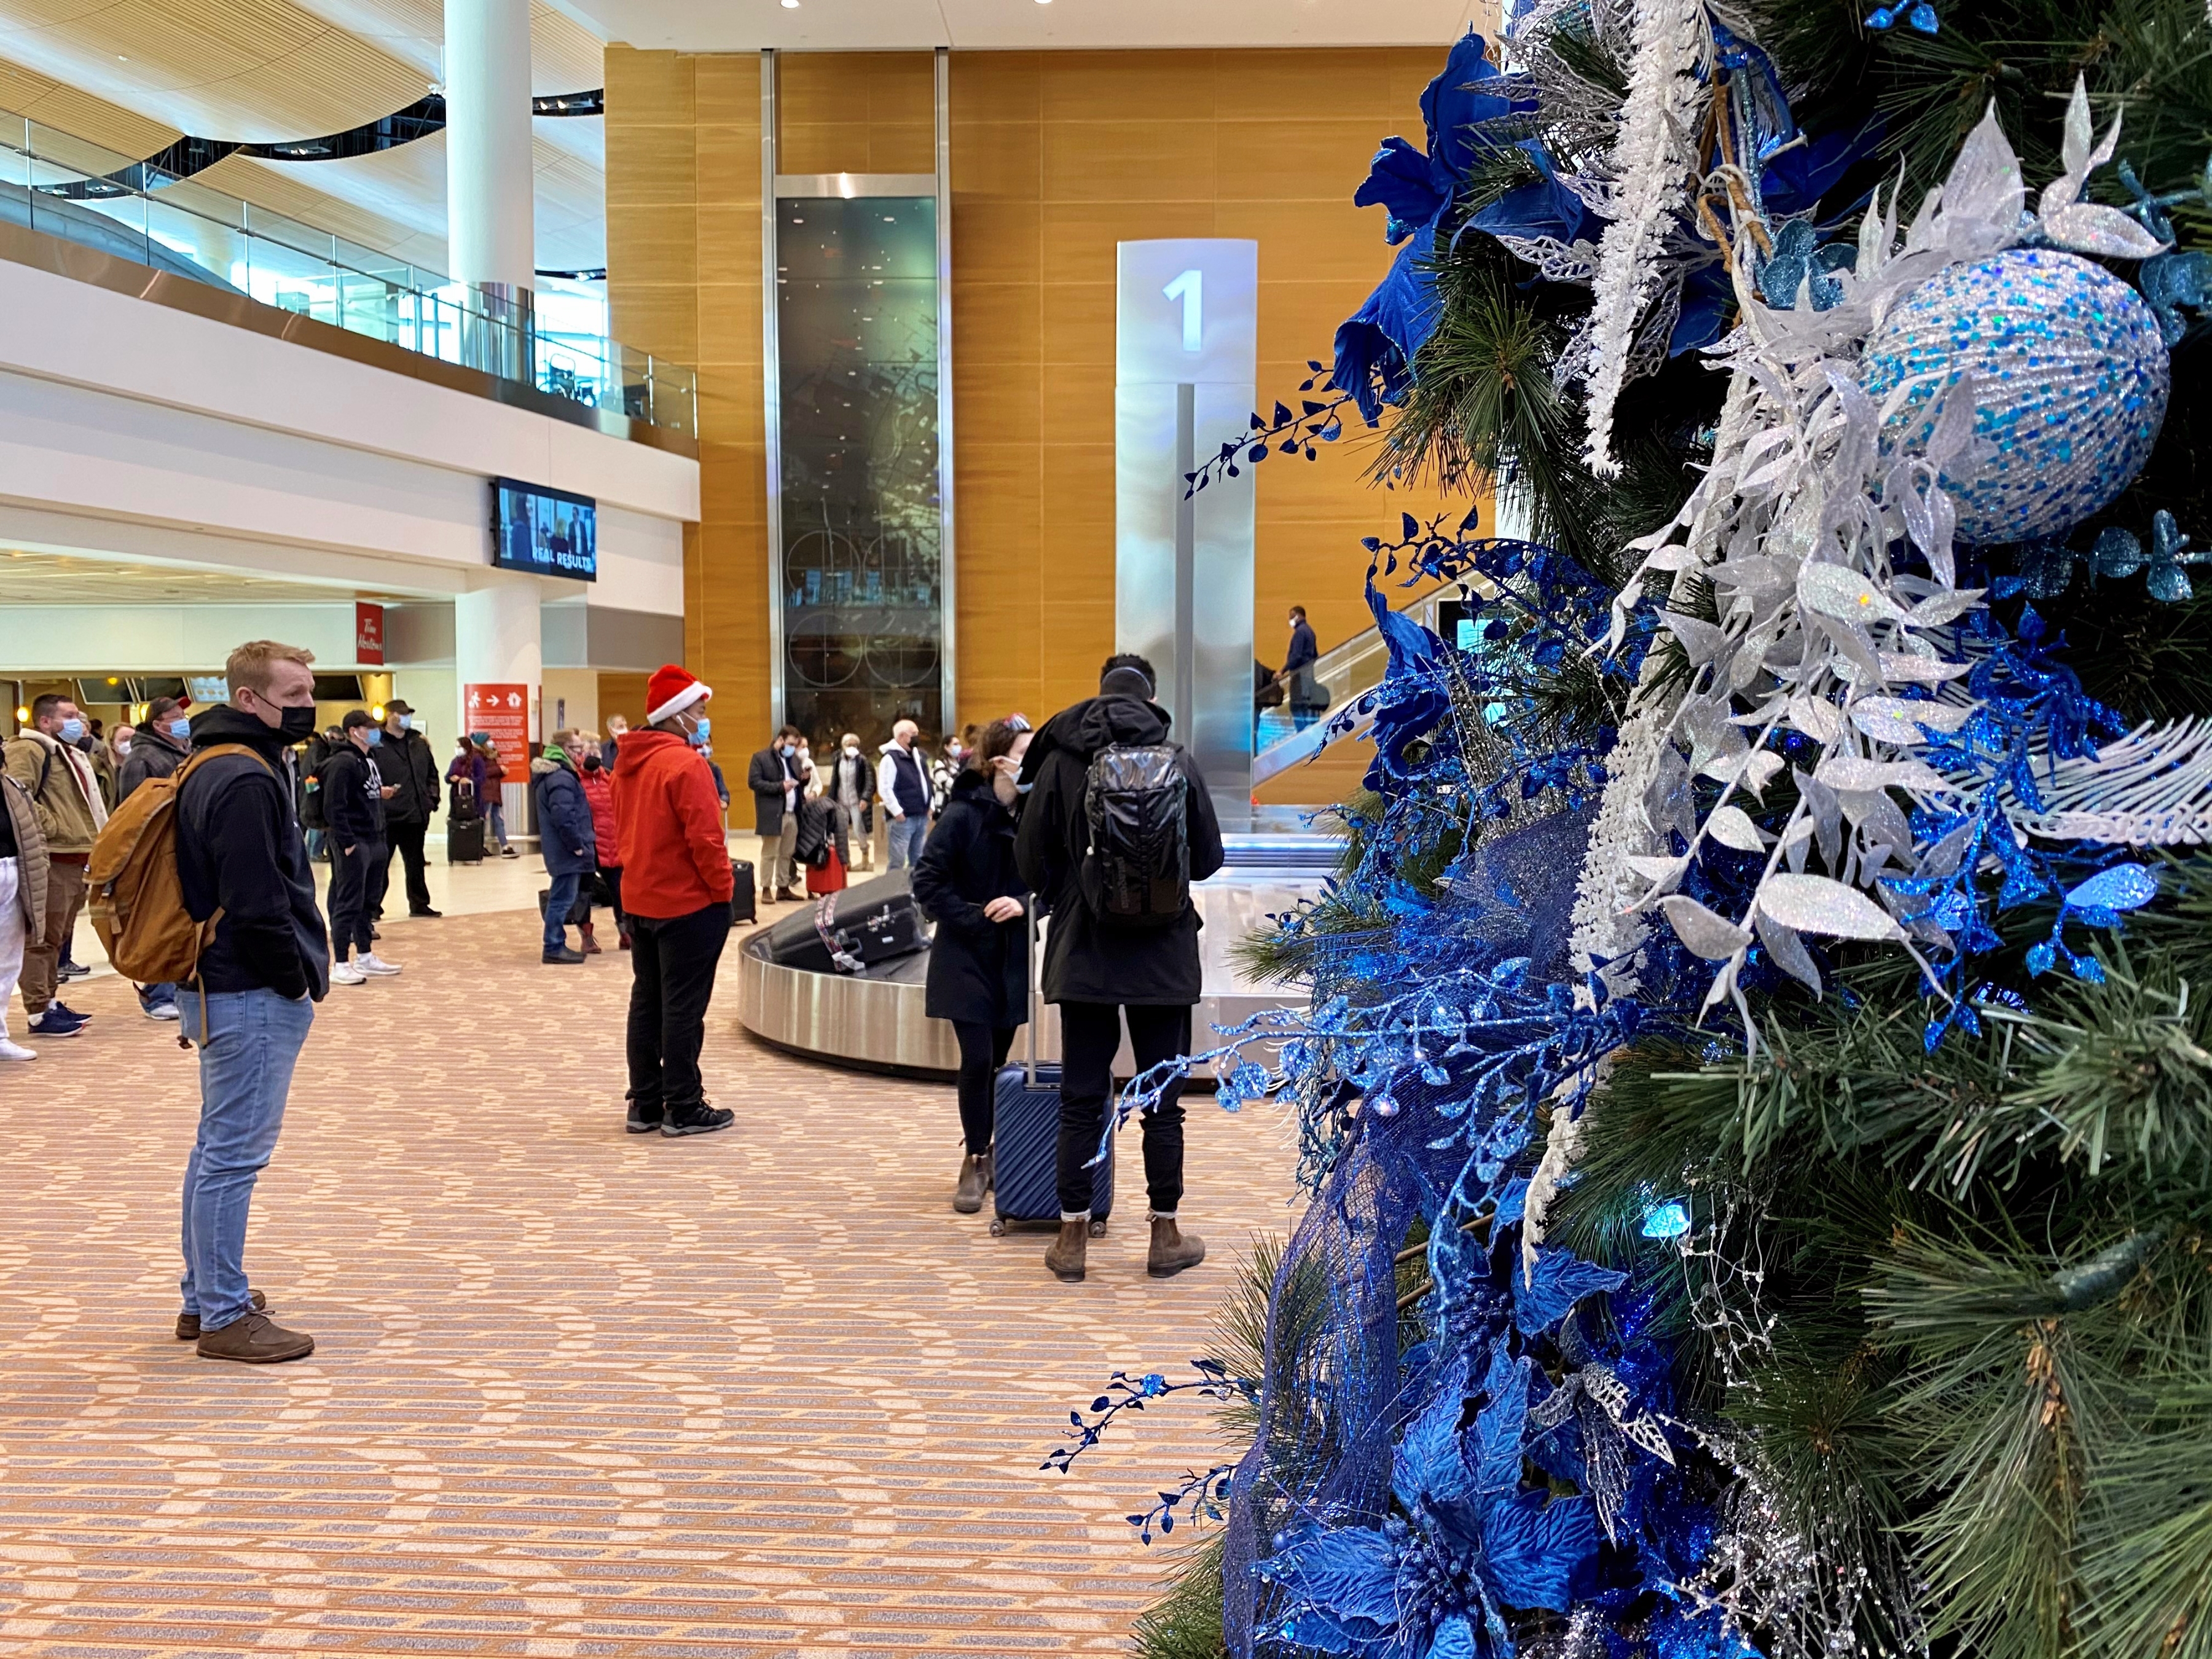 Travellers stand next to a Christmas tree in the Arrivals Hall while waiting for the luggage.